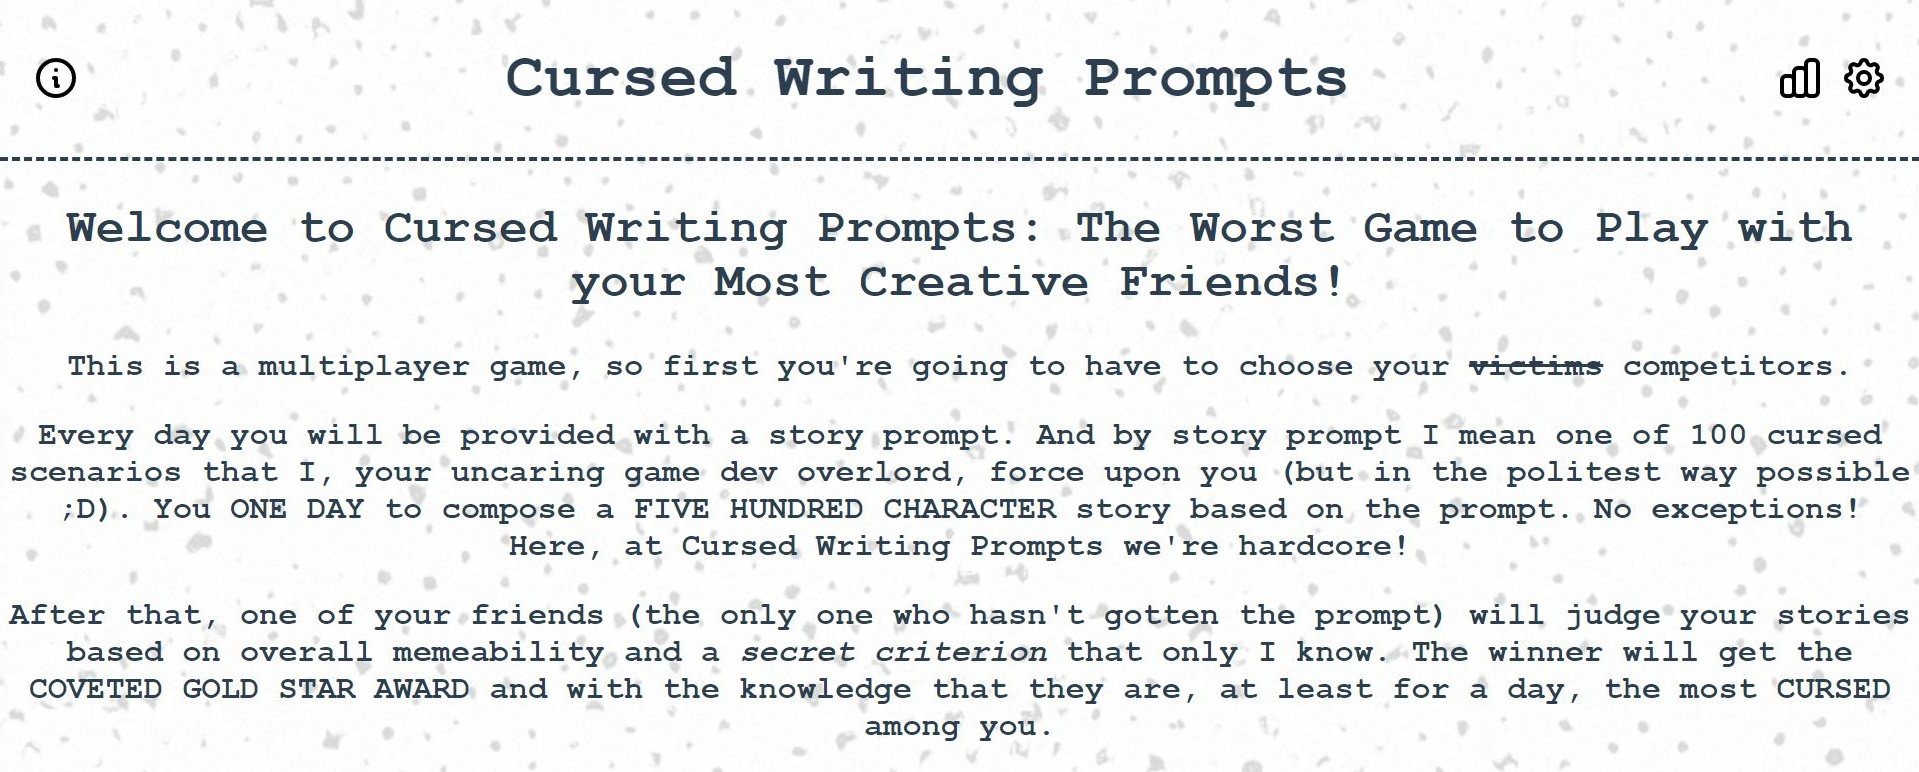 Cursed Writing Prompts